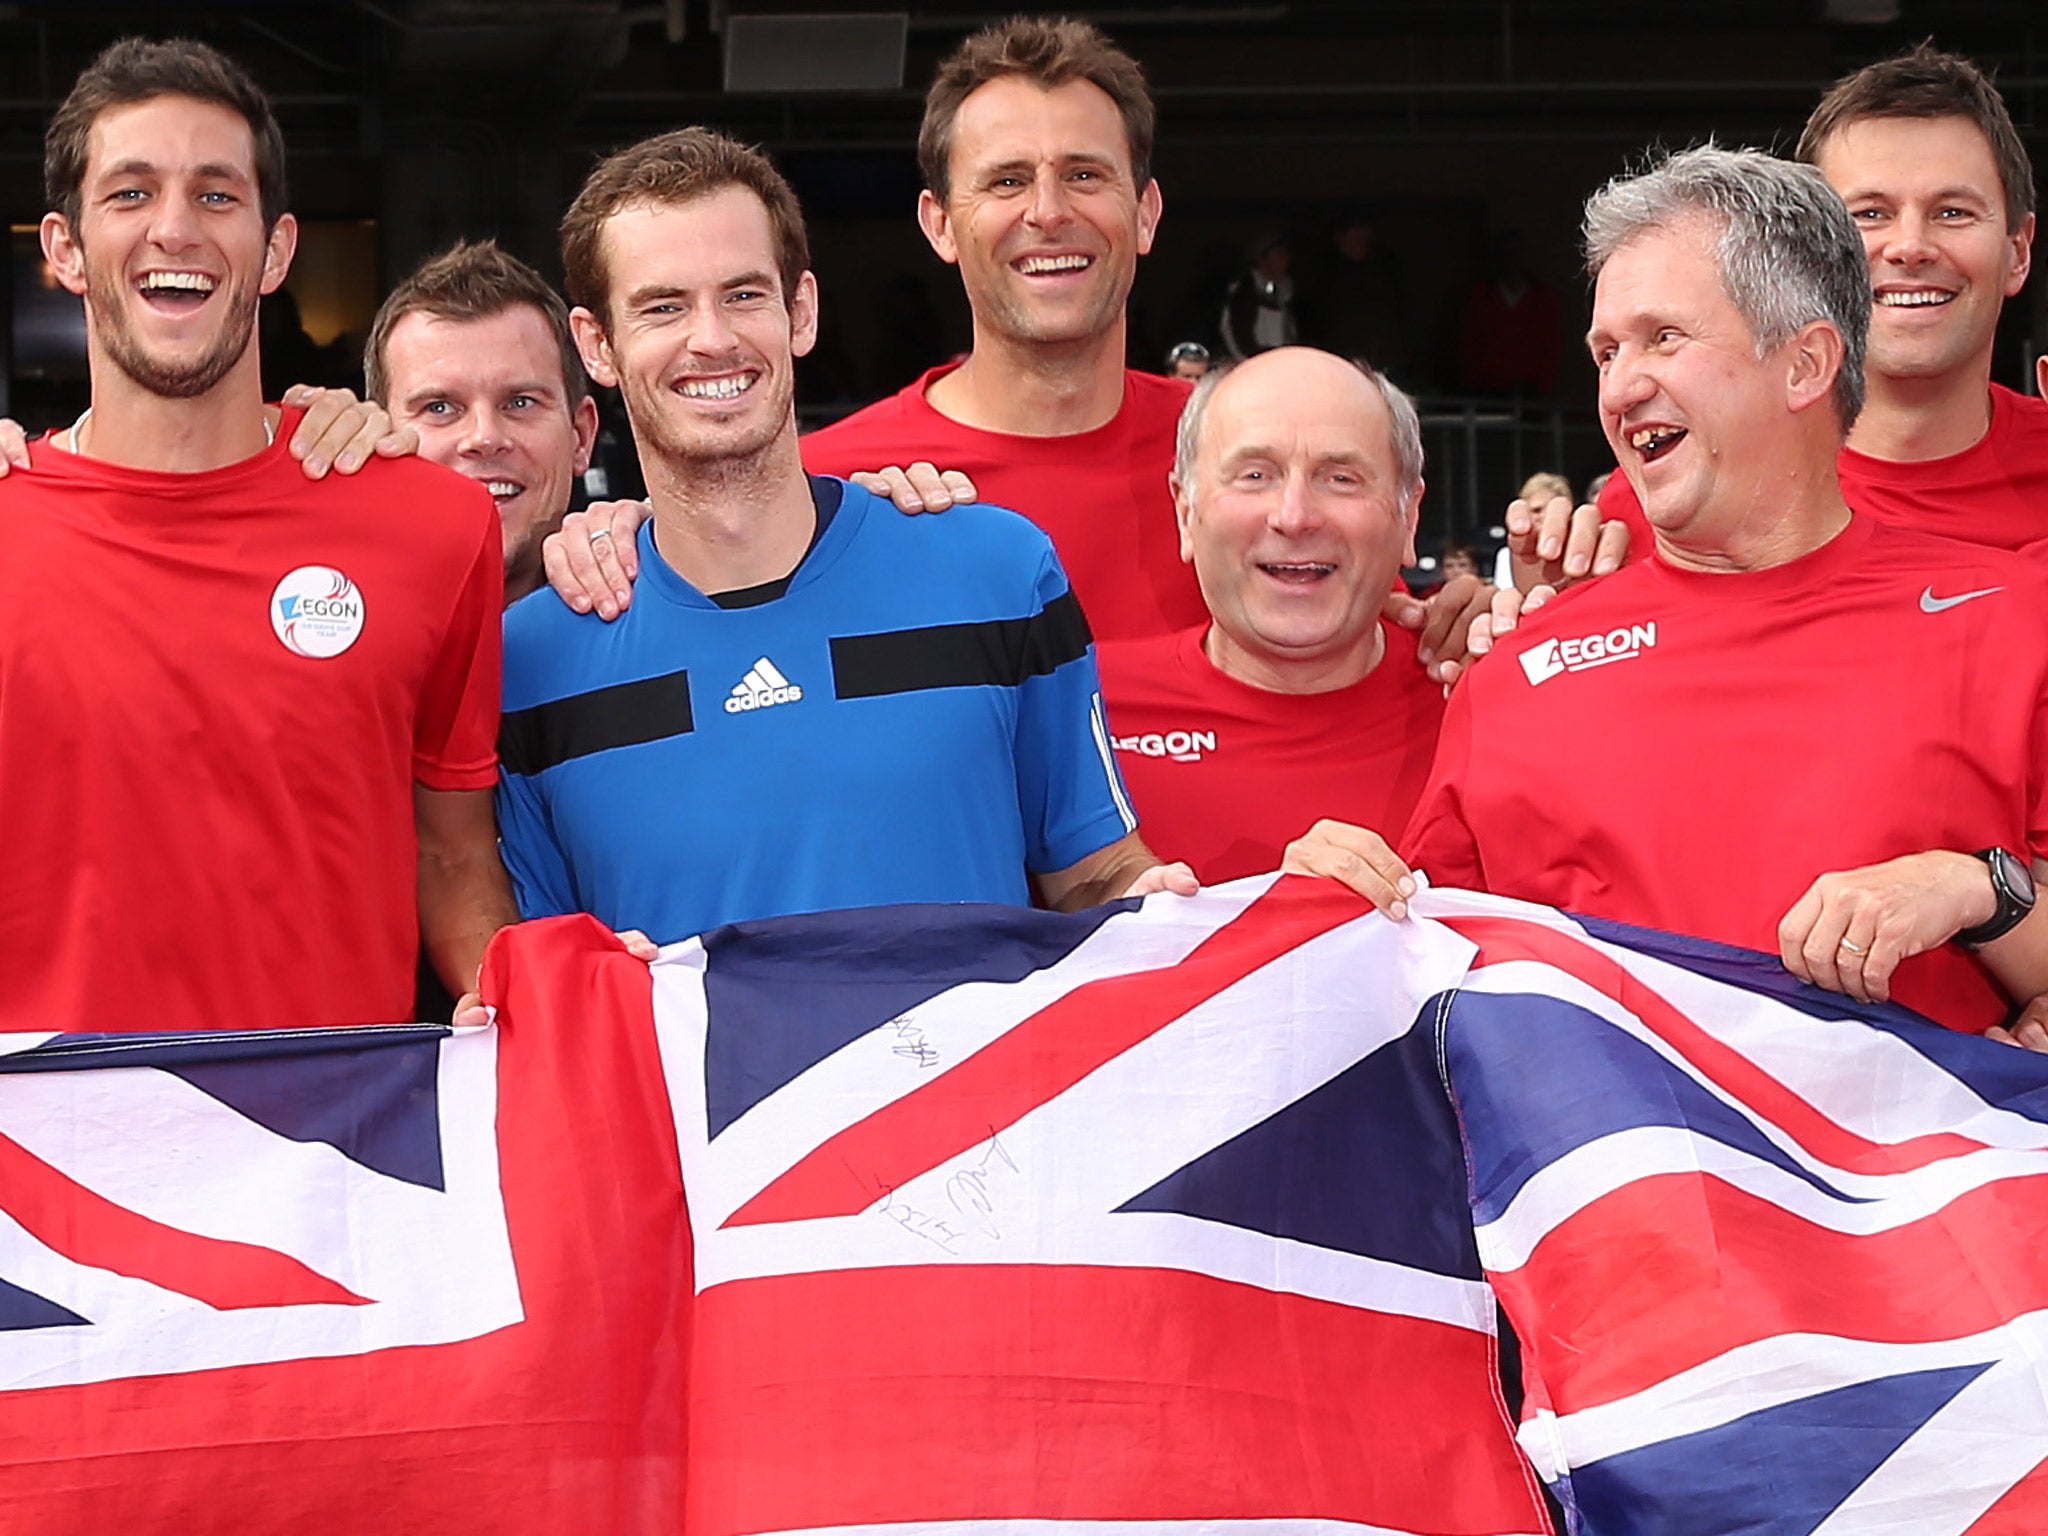 Andy Murray and his GB team-mates beat the US in February, just days after the Australian Open